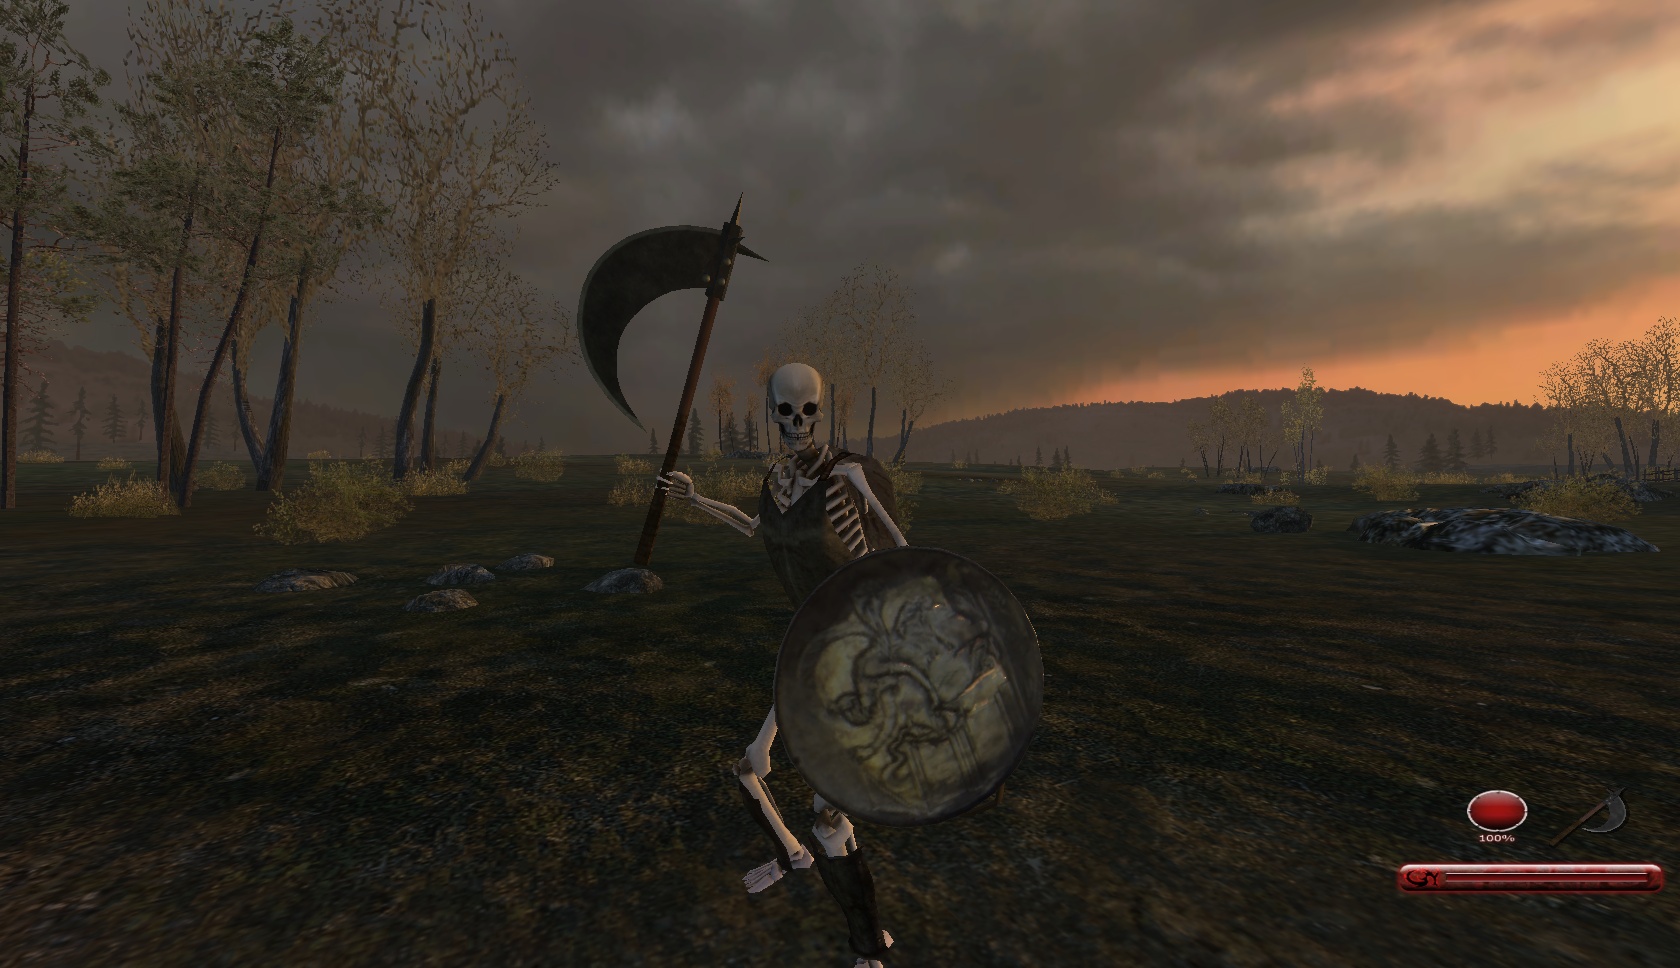 rise of the undead mount and blade wiki